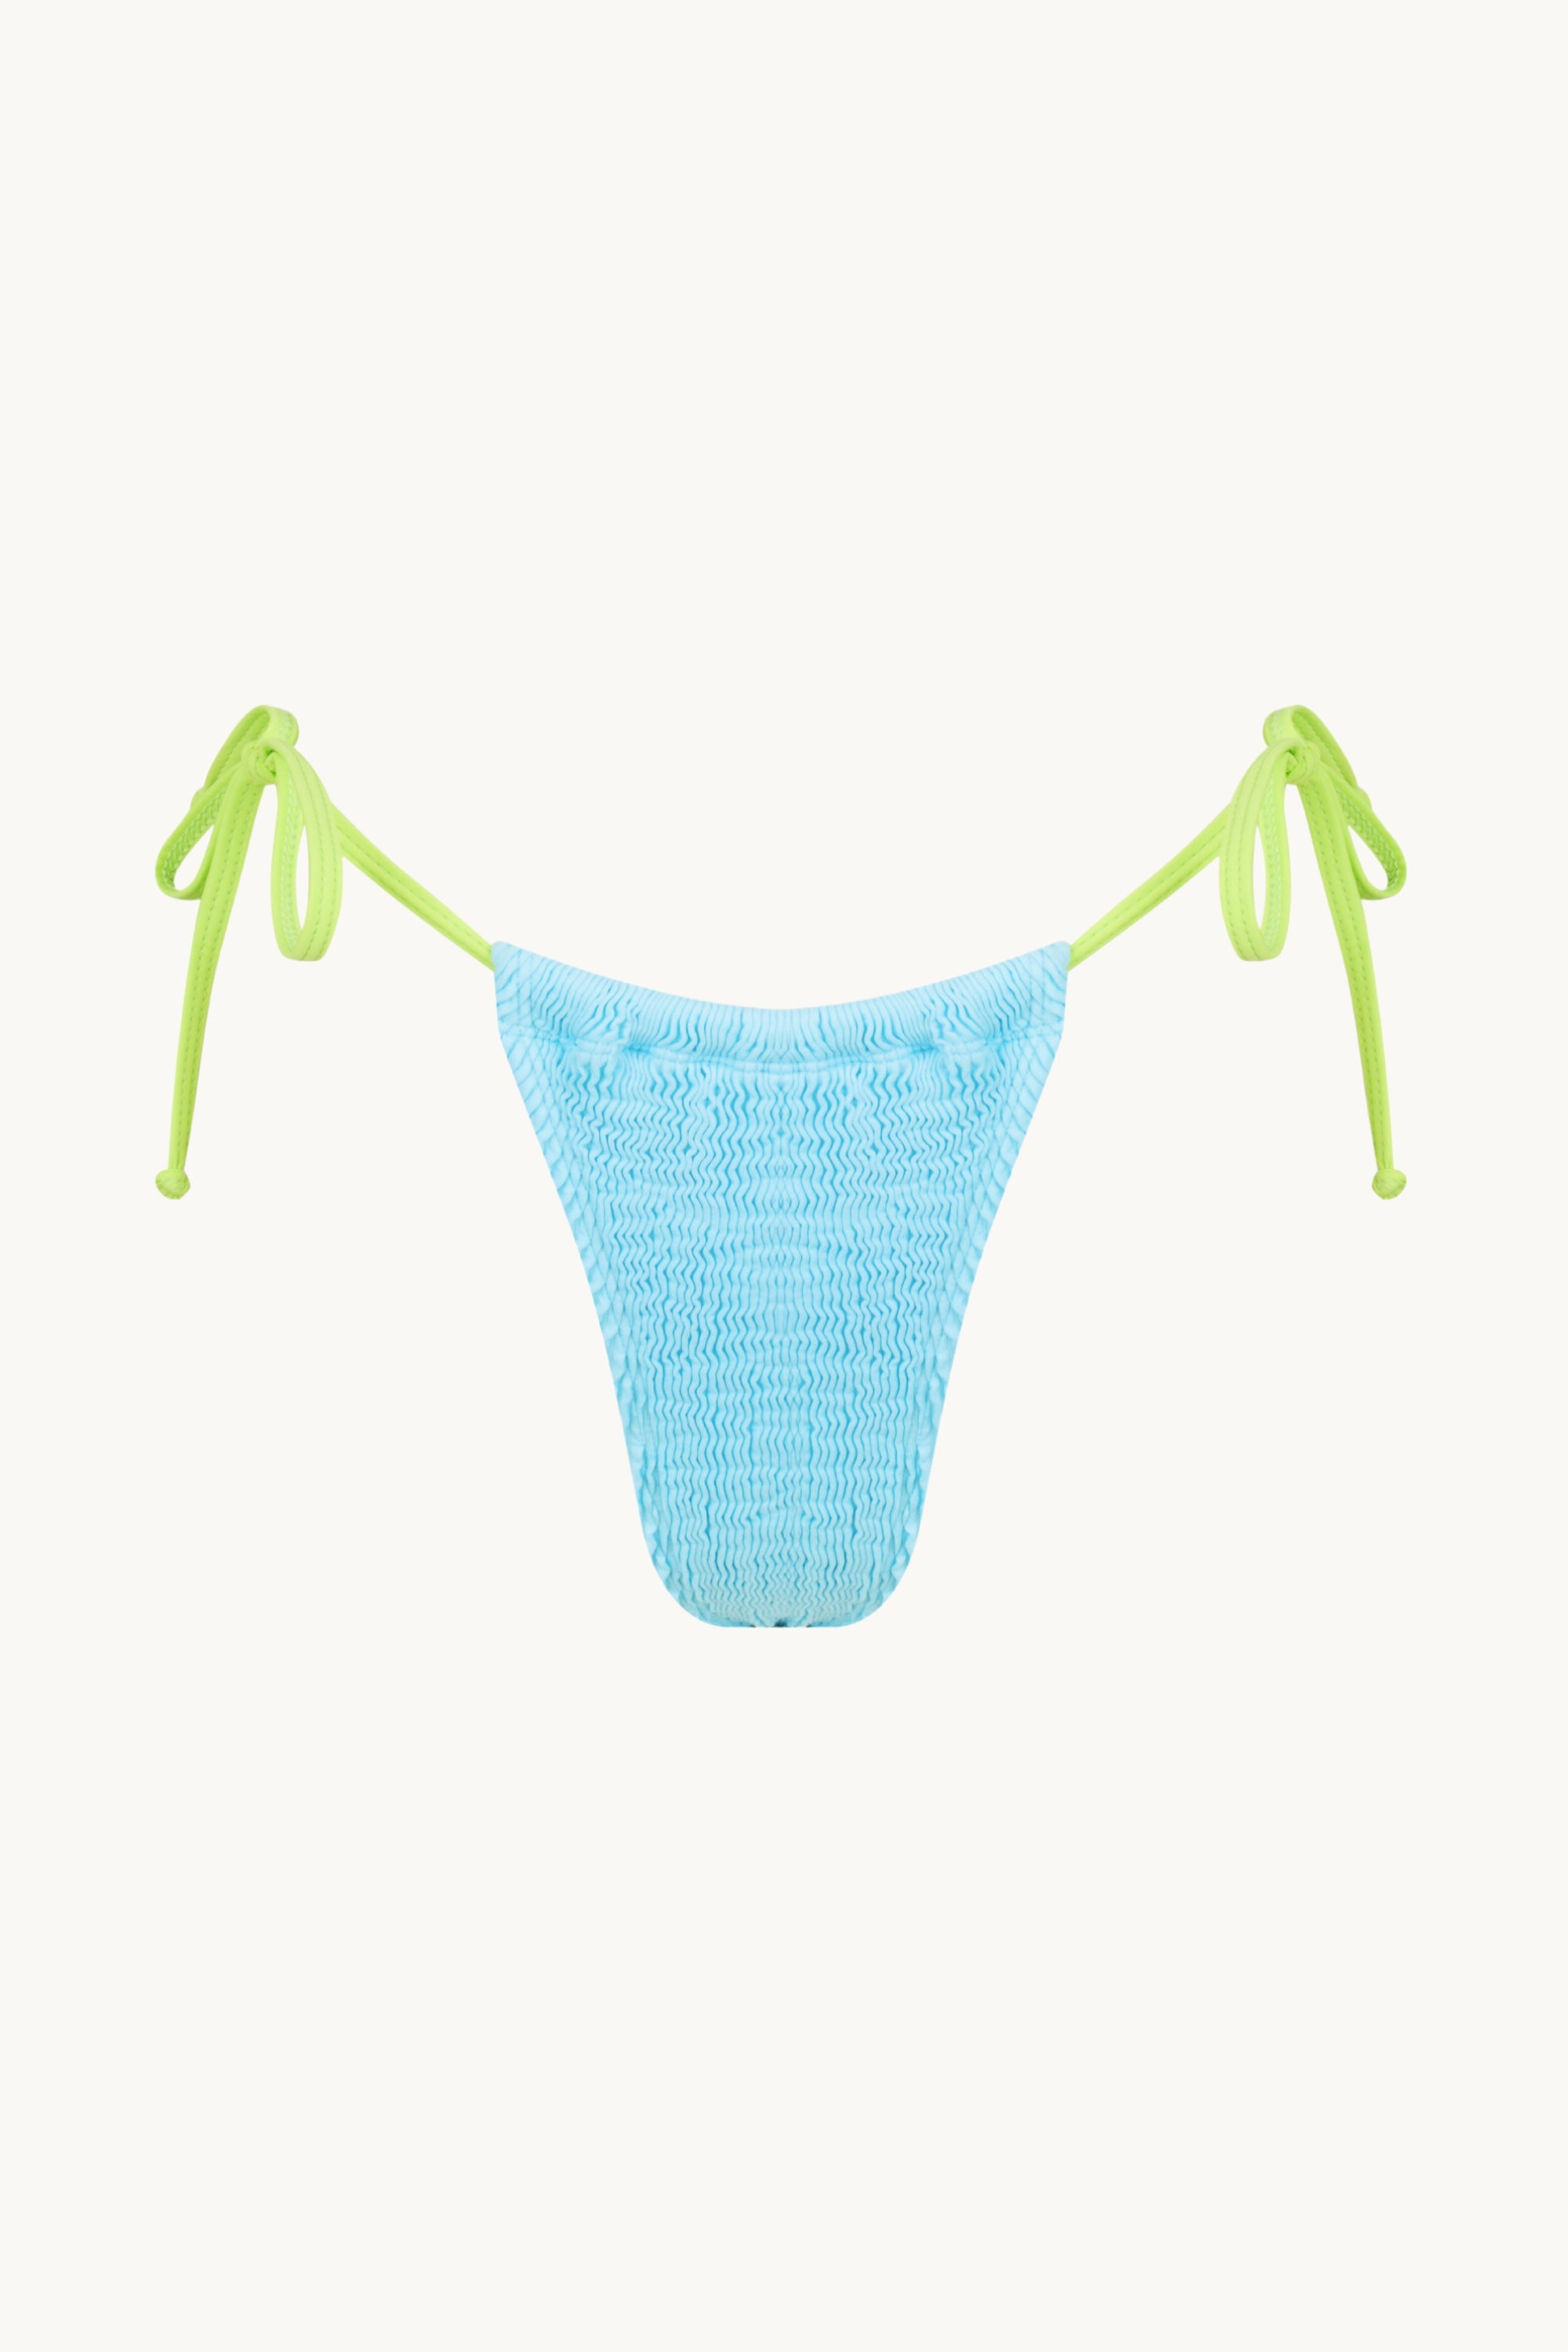 PENINSULA BRIEFS SKY AND CHARTREUSE